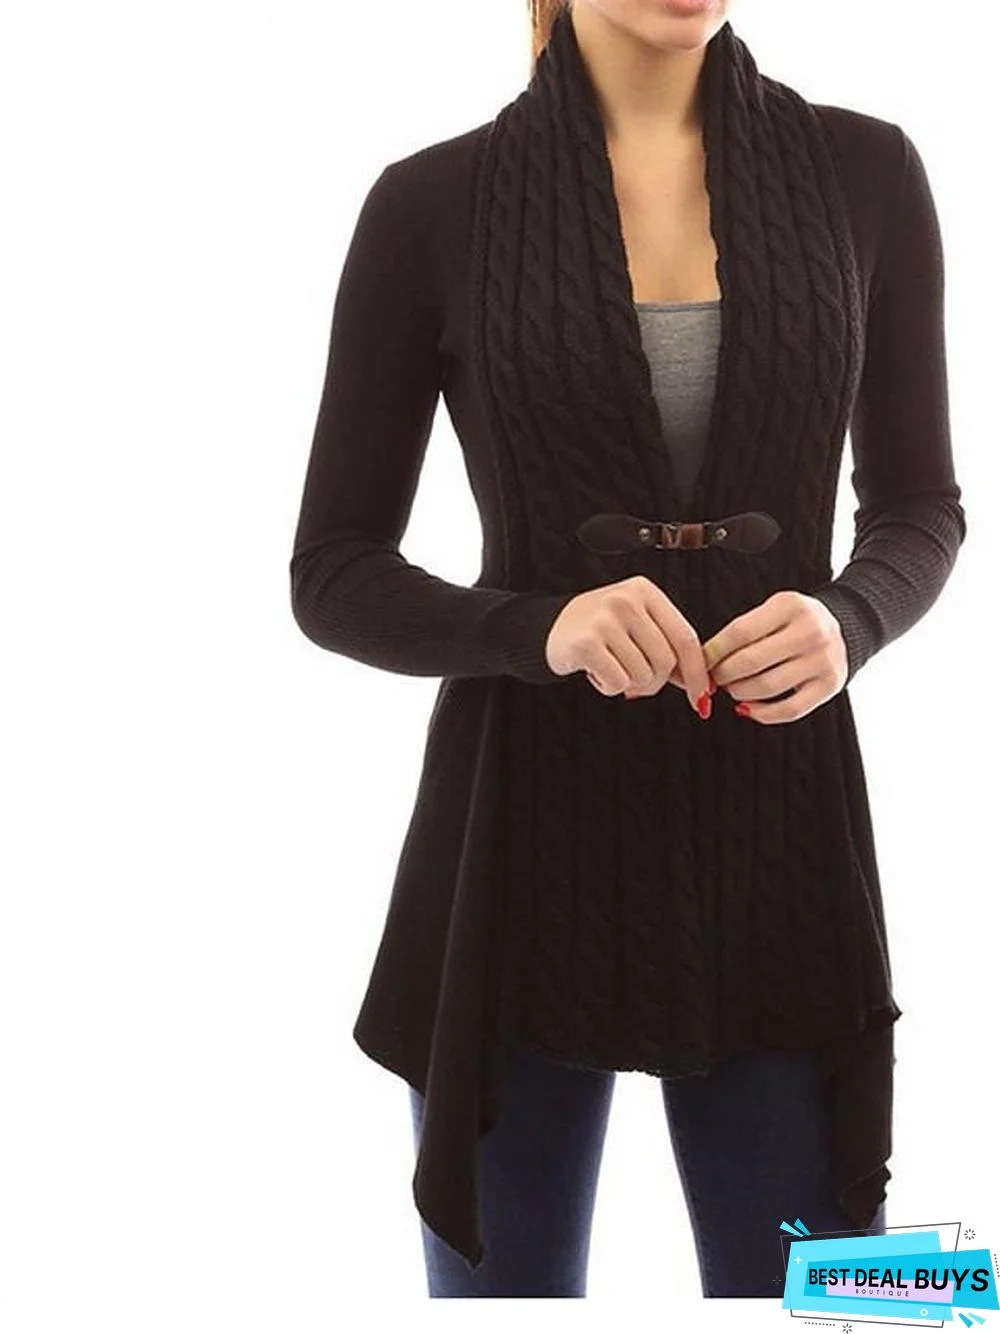 Women's Solid Colored Cardigan Long Sleeve Sweater Cardigans V Neck Black Purple Blushing Pink